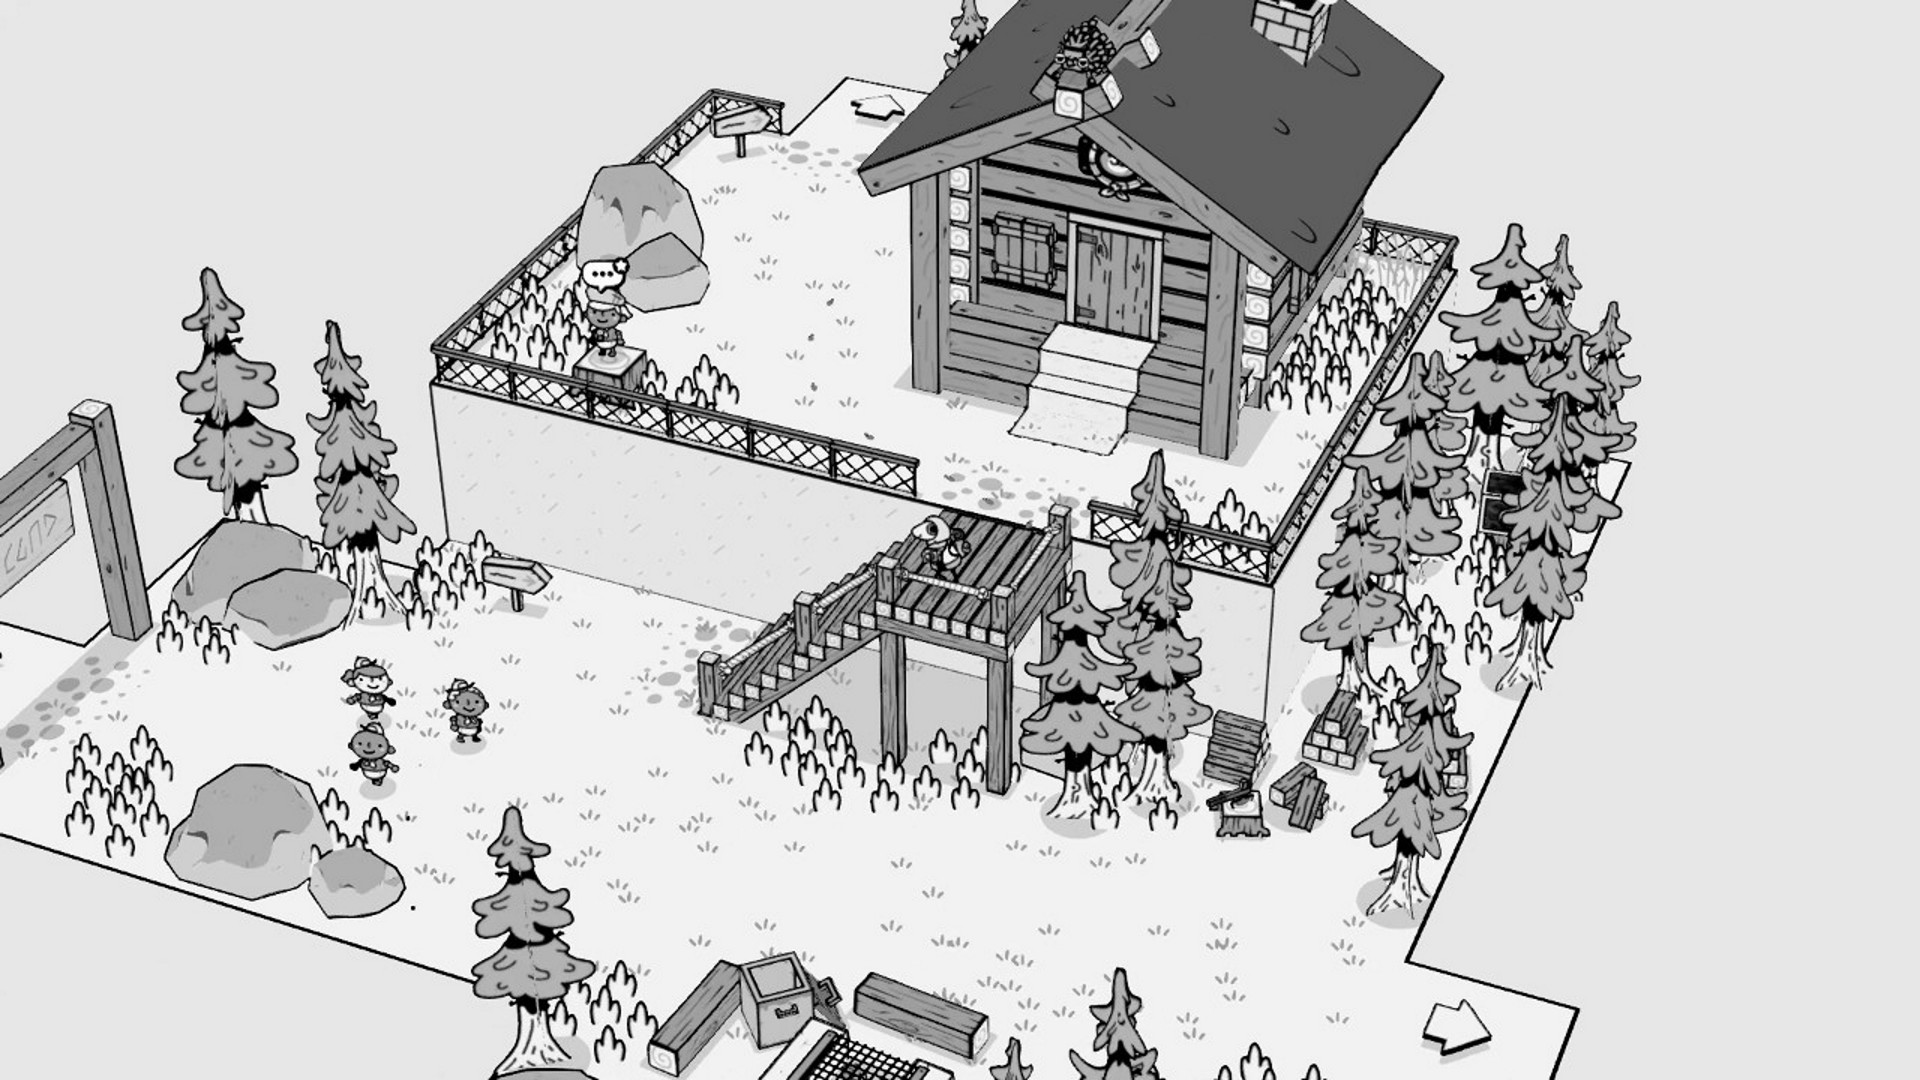 Screenshot from TOEM. A bird's eye view of camping grounds with a wooden lodge in a forest clearing, as small figures stand around the scene. The scene is rendered in black and white.